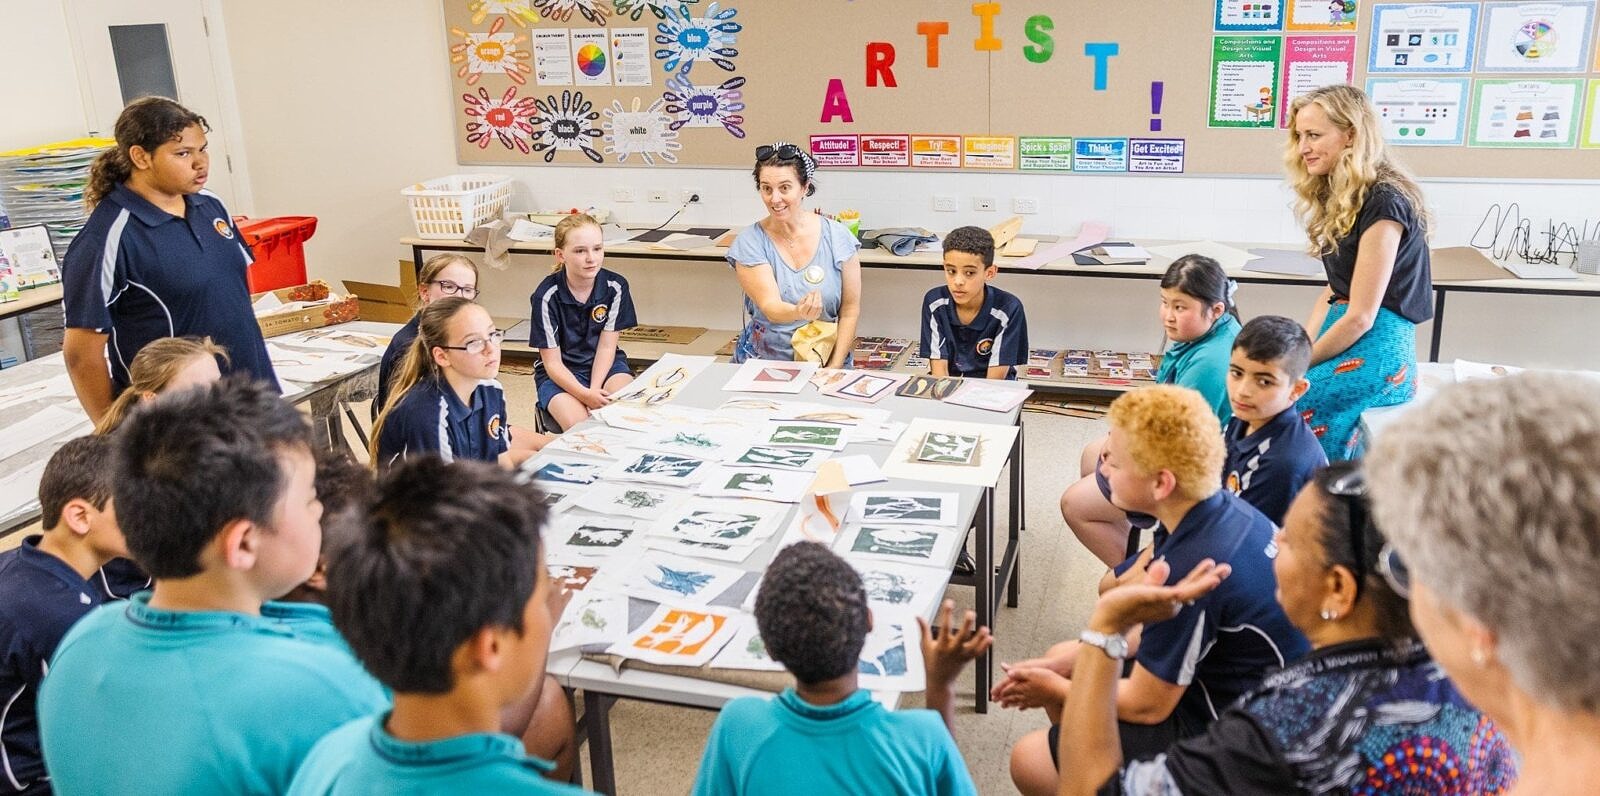 primary school teacher and teaching artist leading students through arts learning lesson